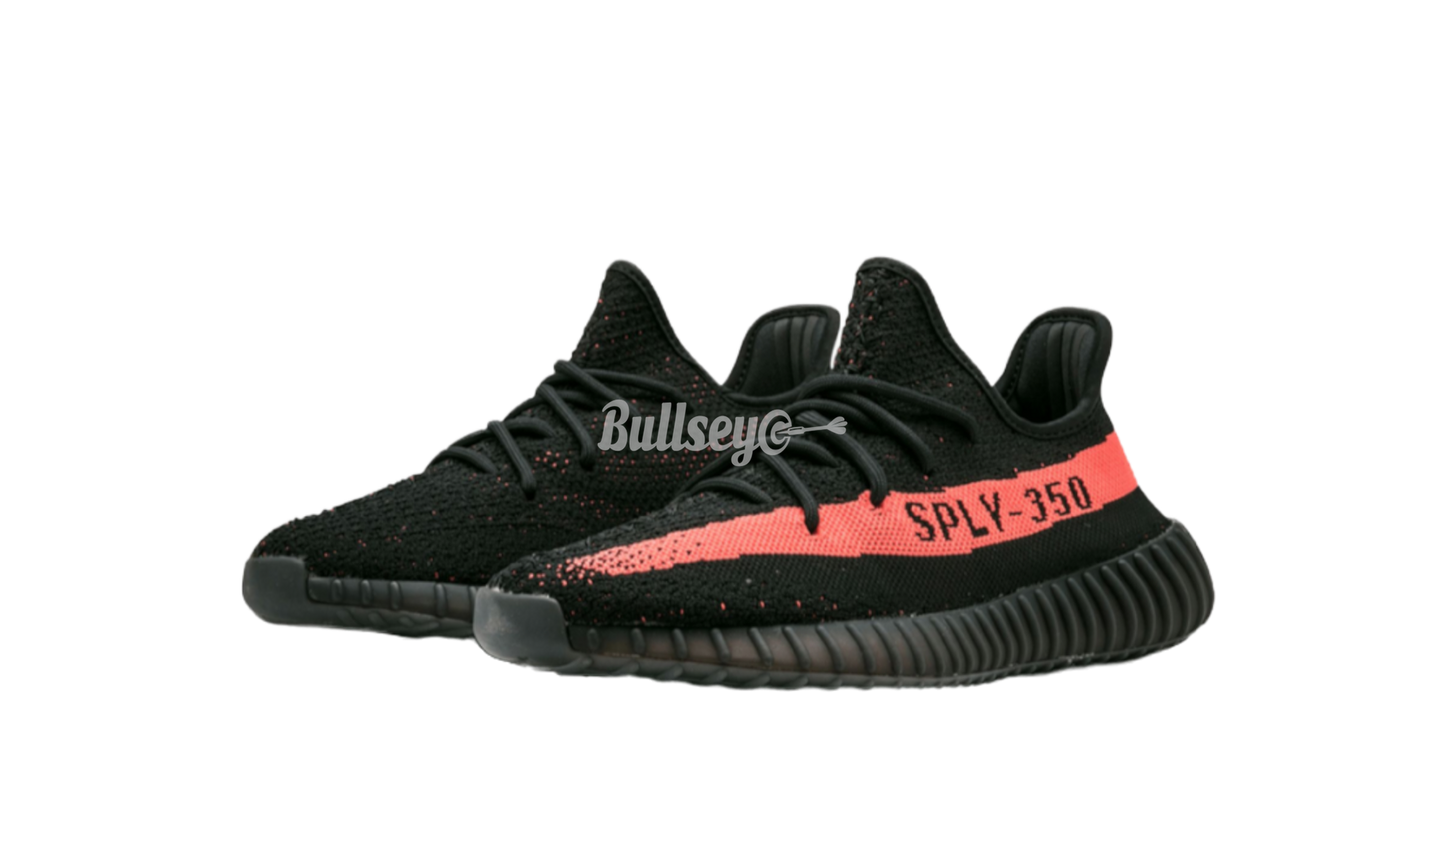 Adidas Yeezy Boost 350 V2 "Core Black Red/Red Stripe"